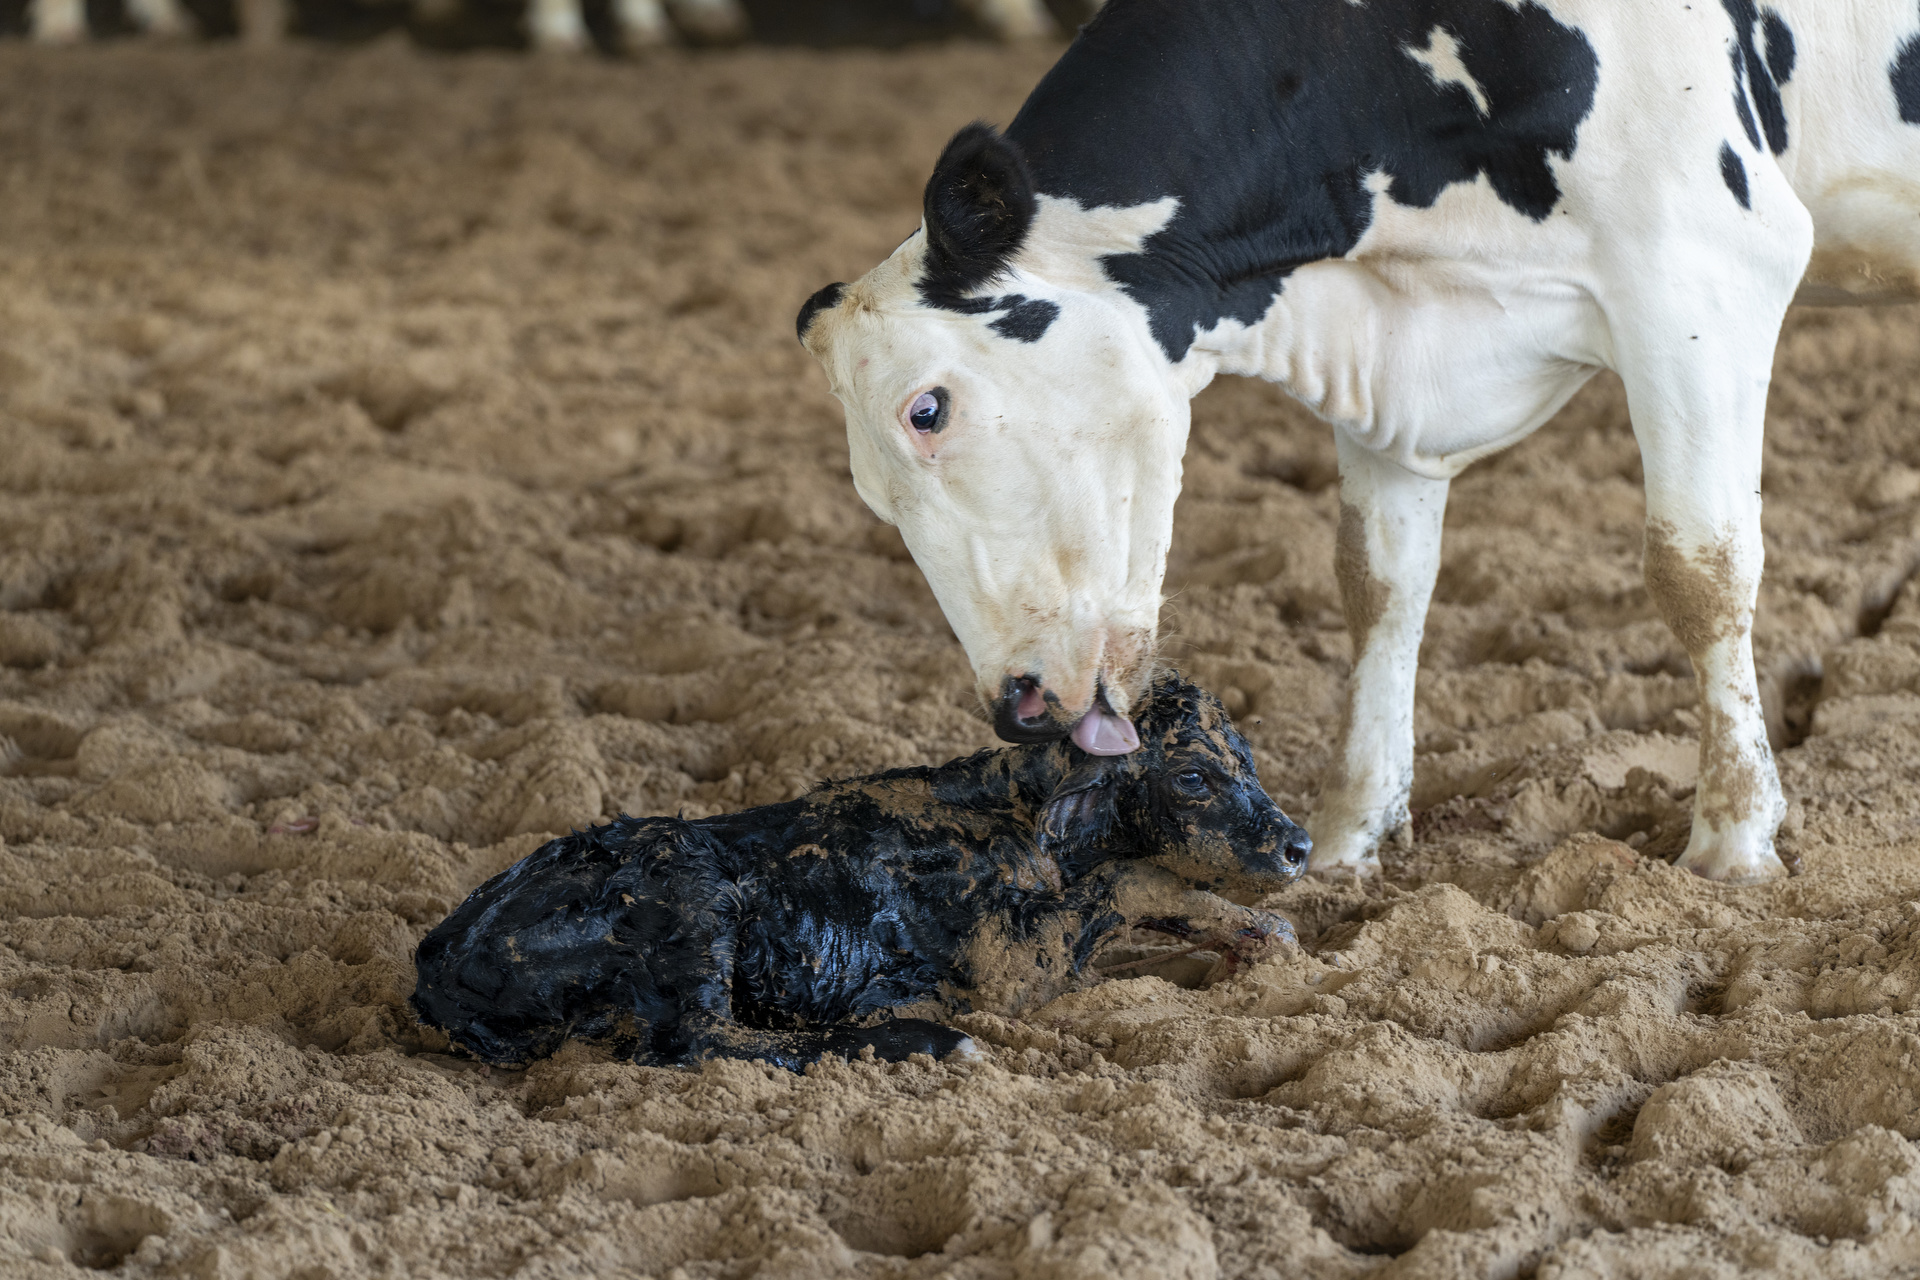 A Holstein cow licks her calf after giving birth.